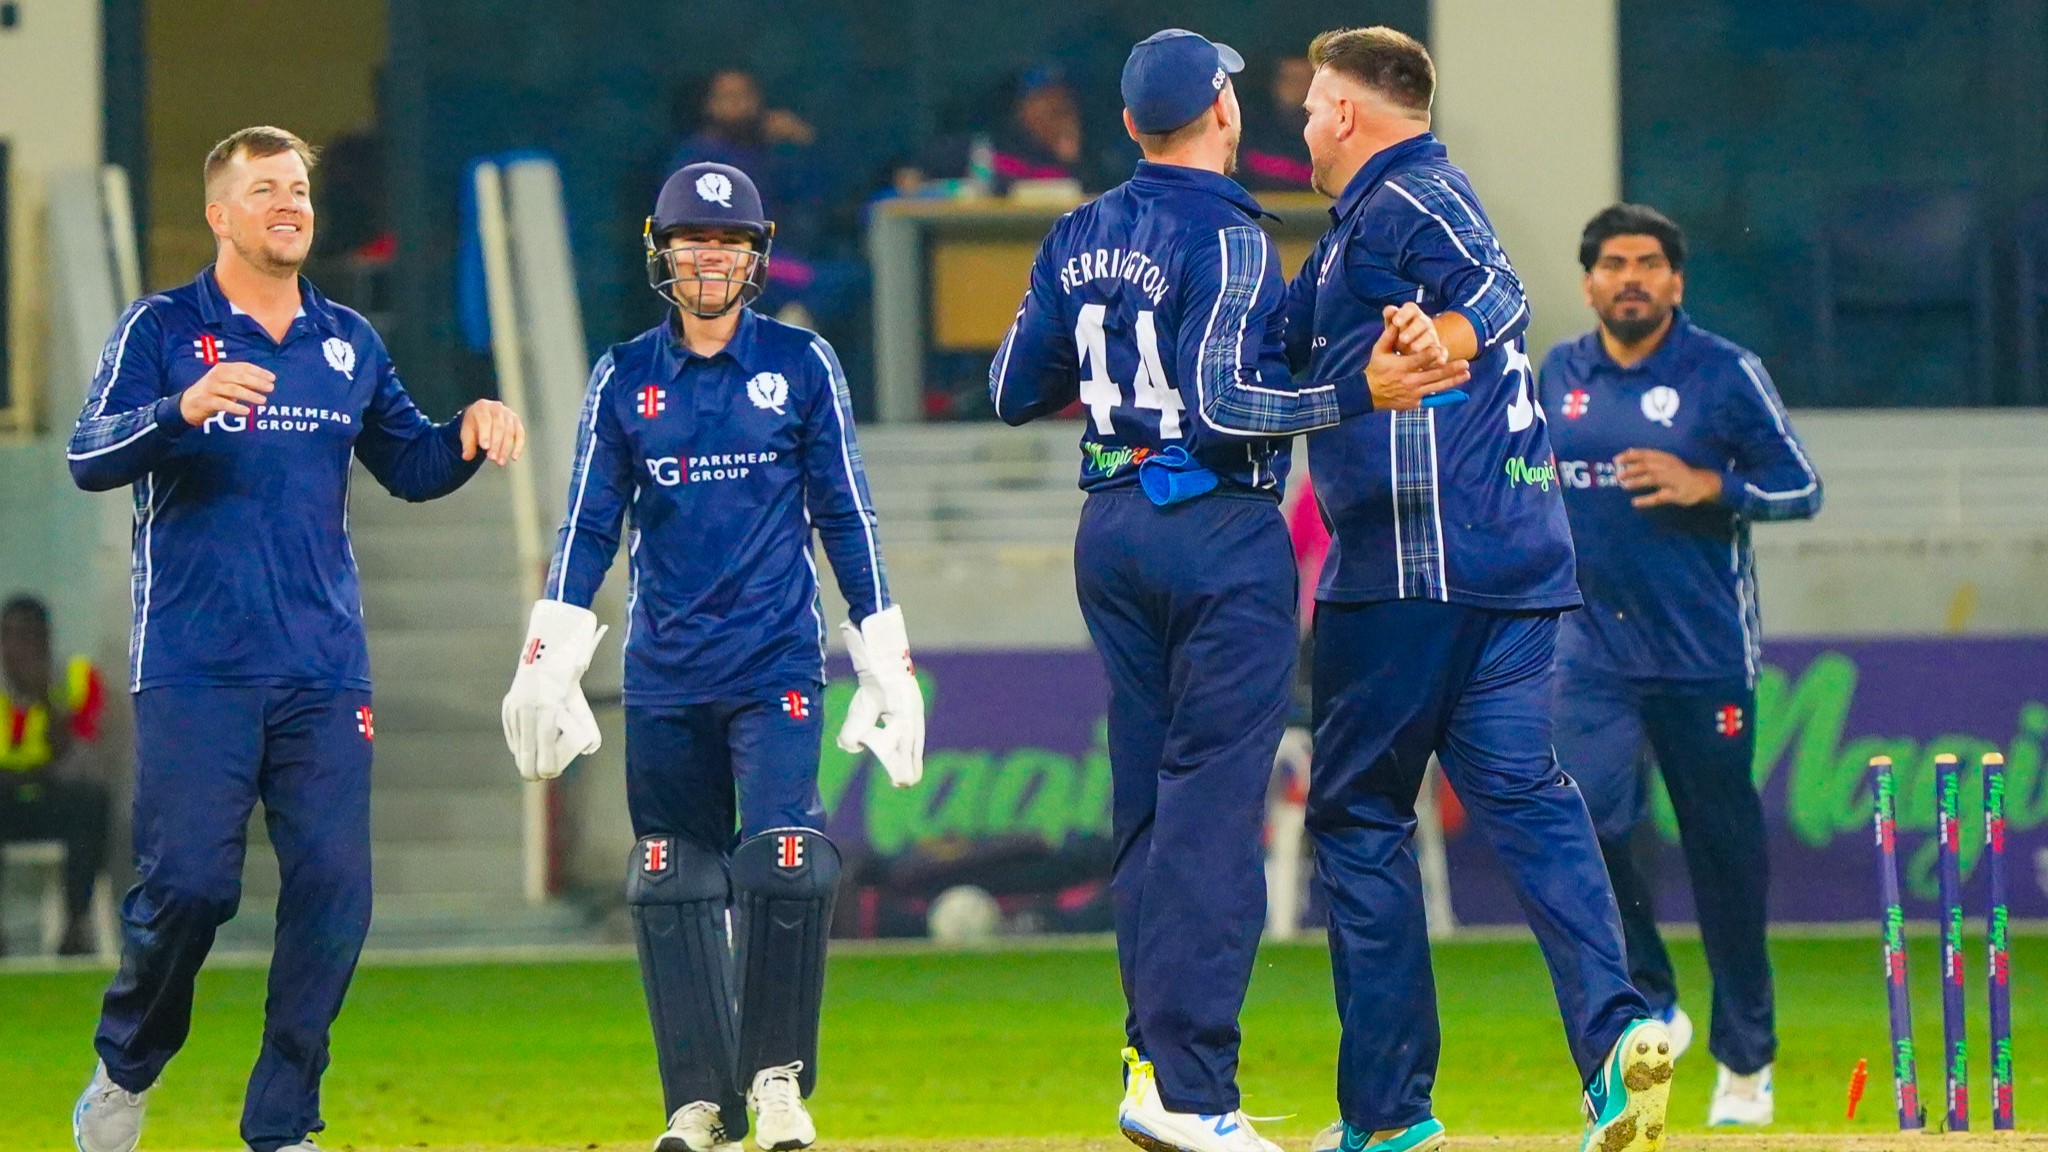 SCOTLAND DEFEAT UAE TO SECURE SERIES VICTORY